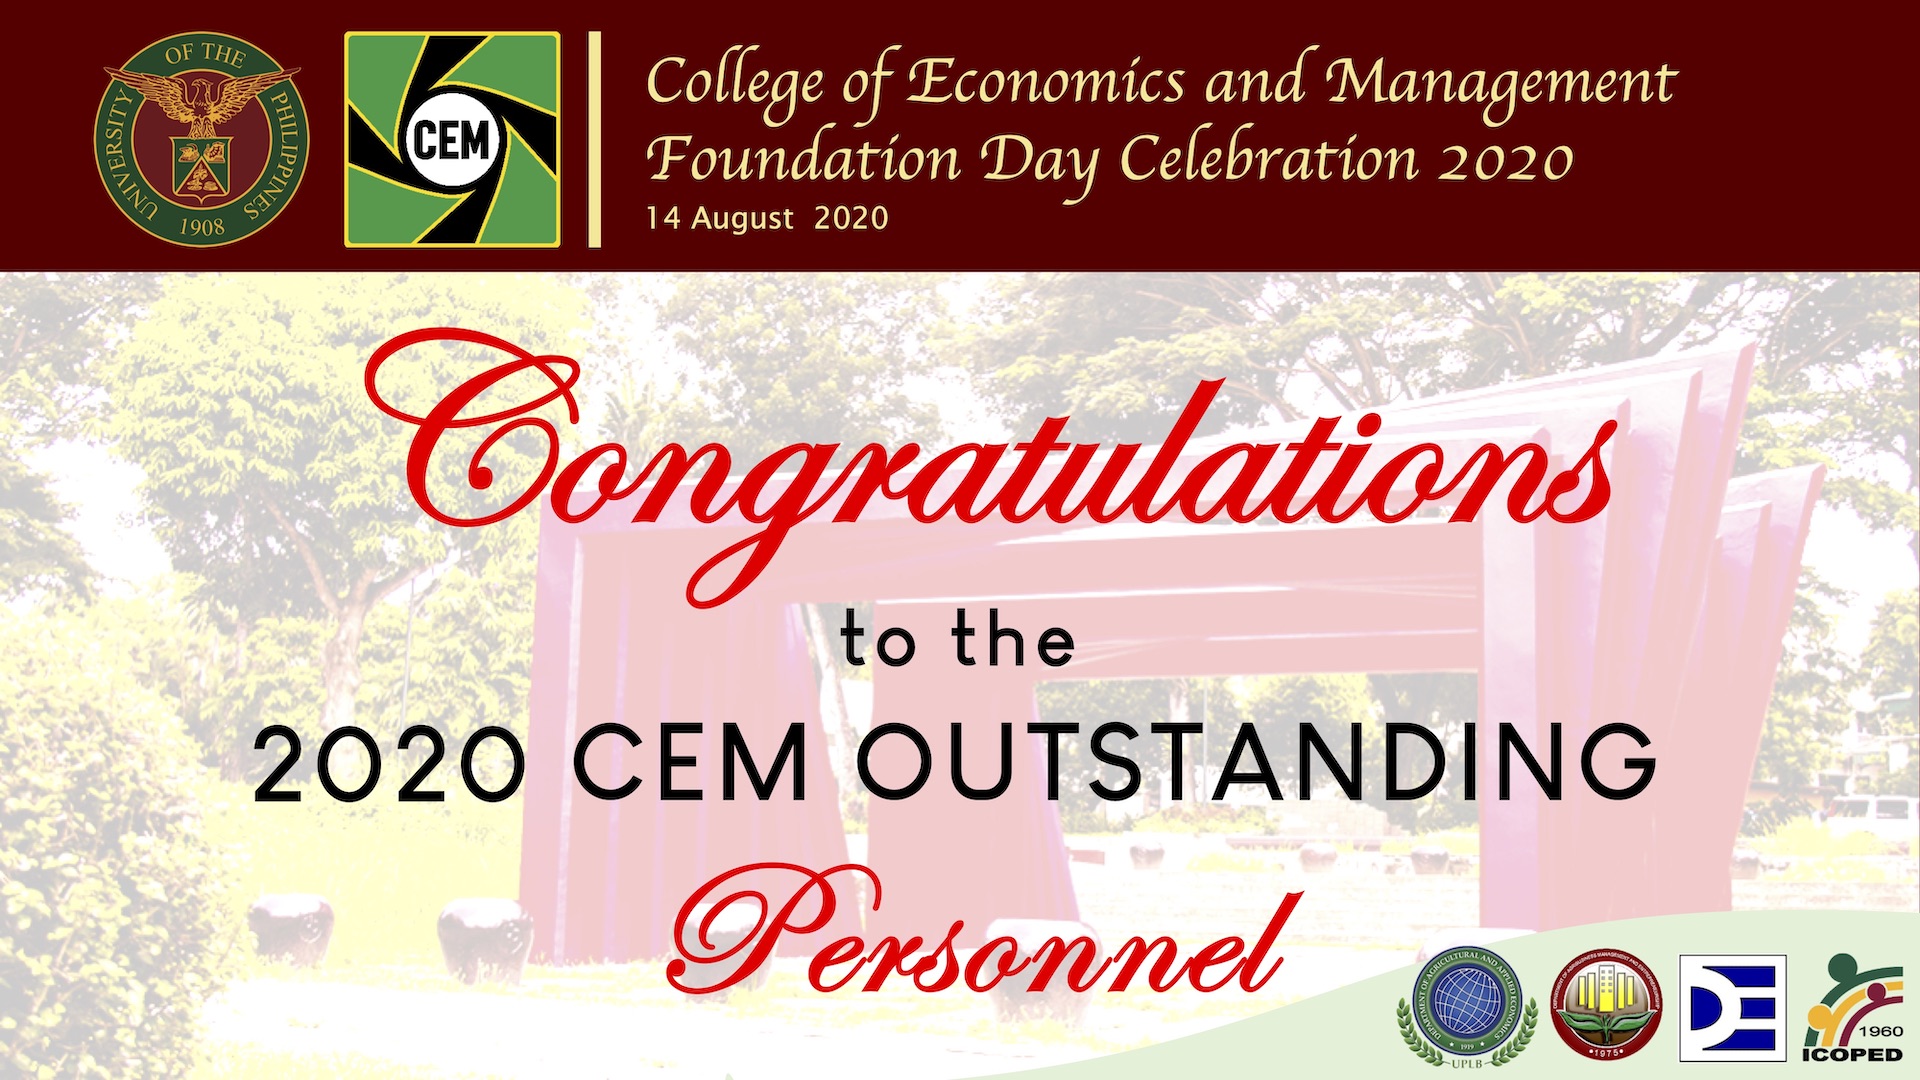 CEM recognized its 2020 Outstanding Personnel during its Foundation Day Celebration